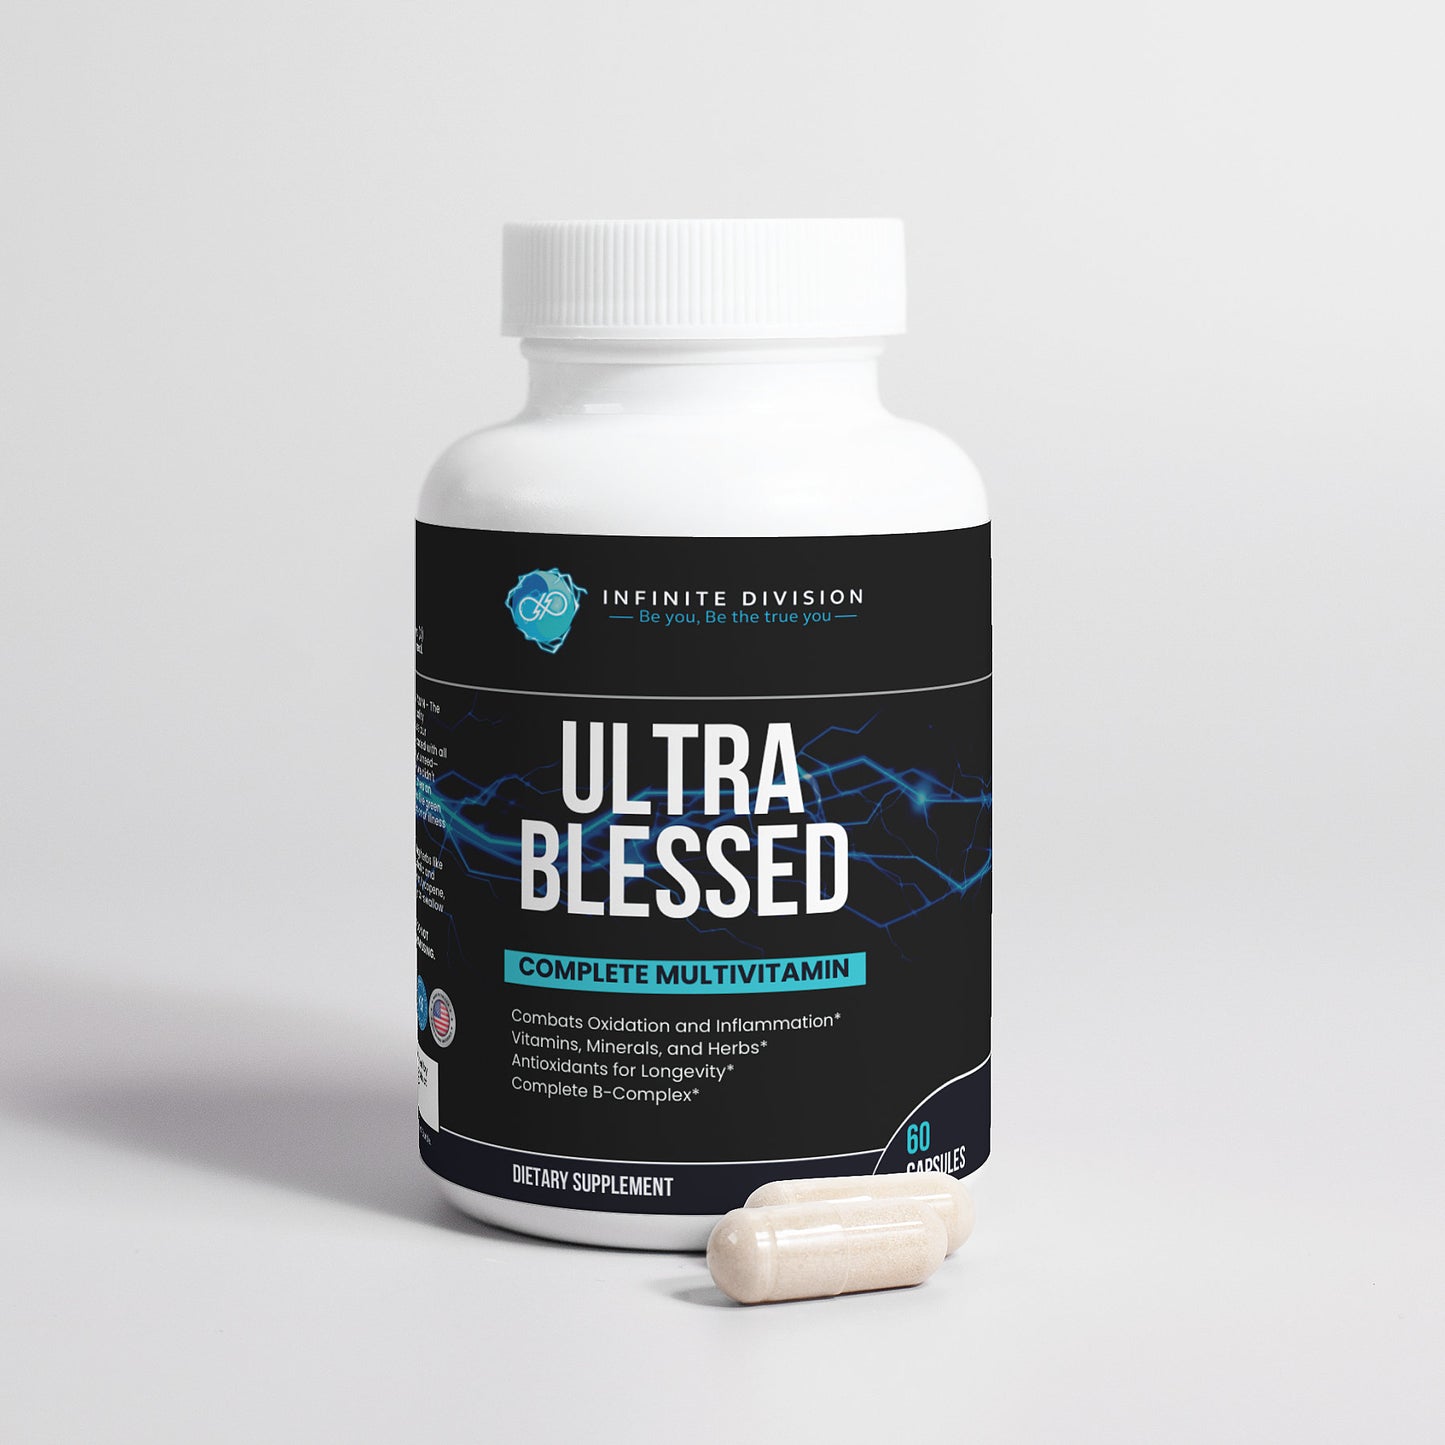 Ultra Blessed: Complete Multivitamin